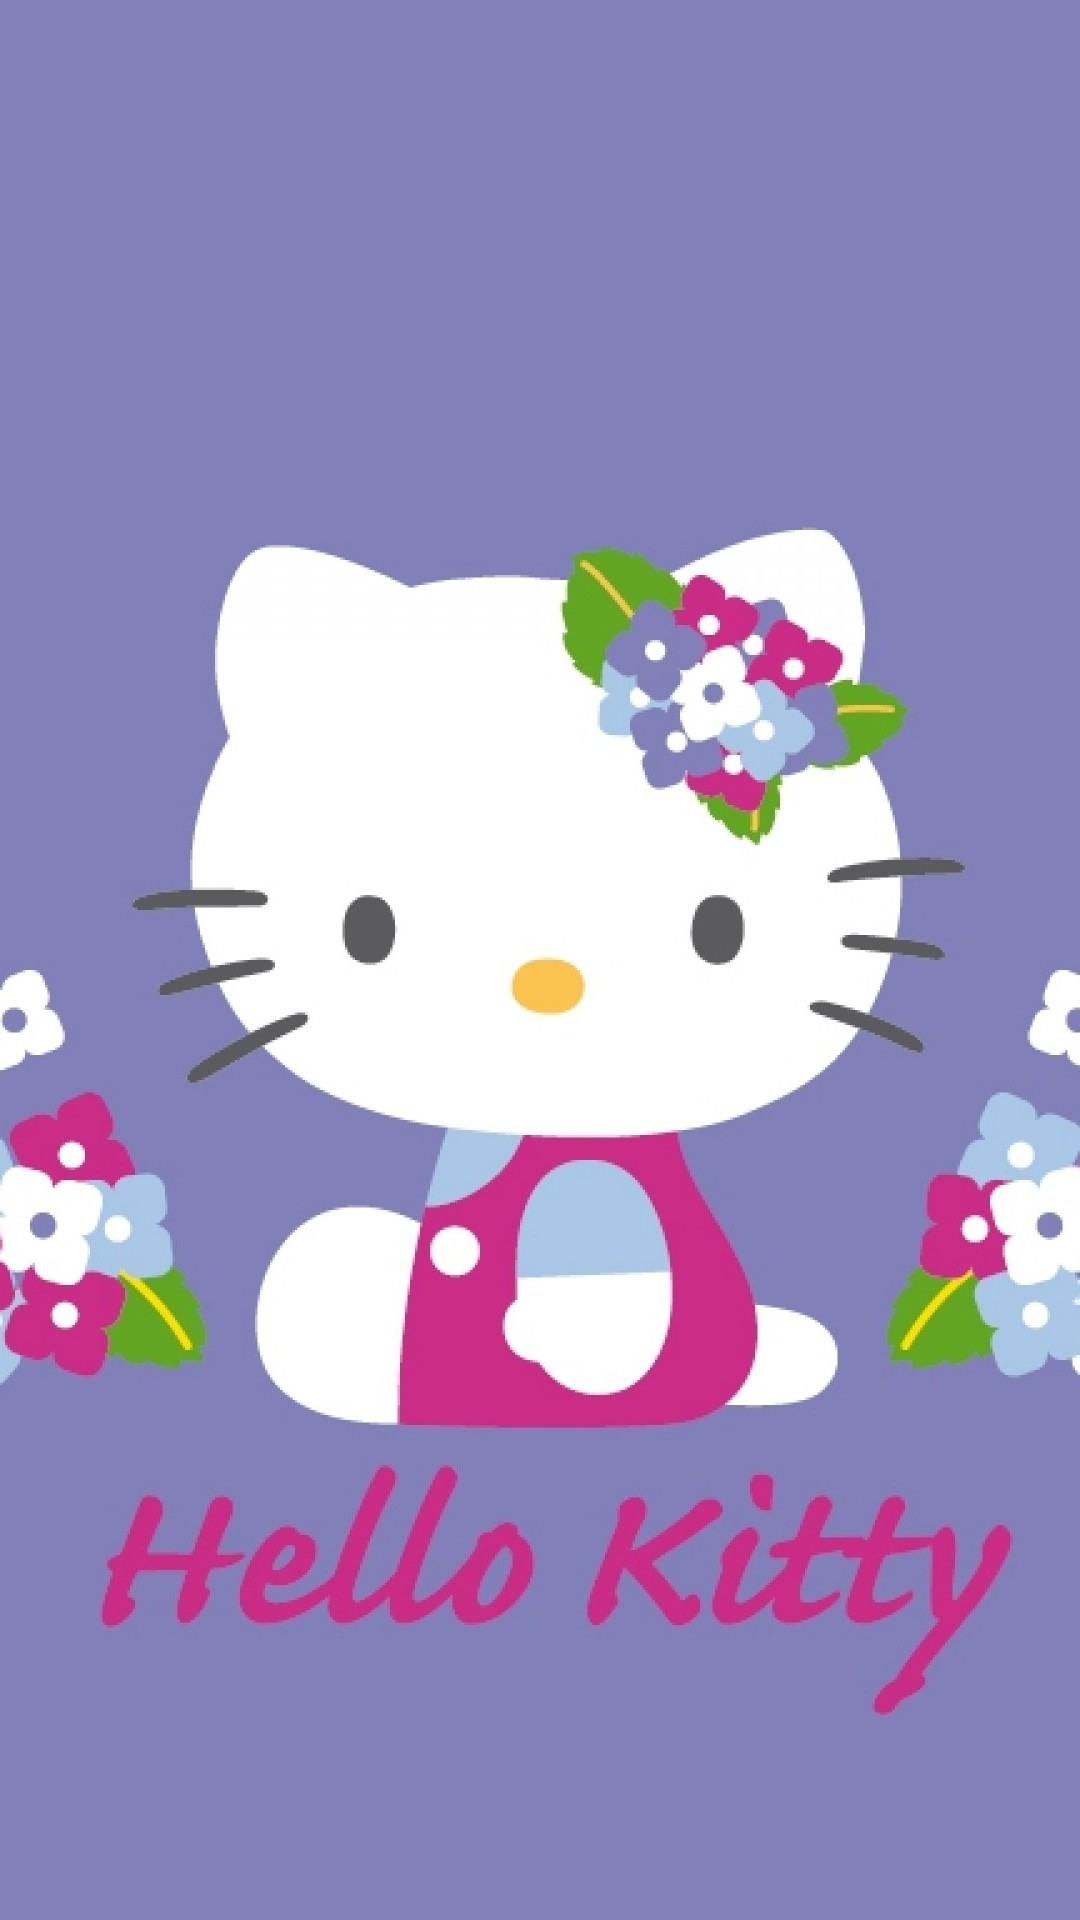 Hello Kitty Iphone 6 Wallpaper With Image Resolution - Dream Mall , HD Wallpaper & Backgrounds